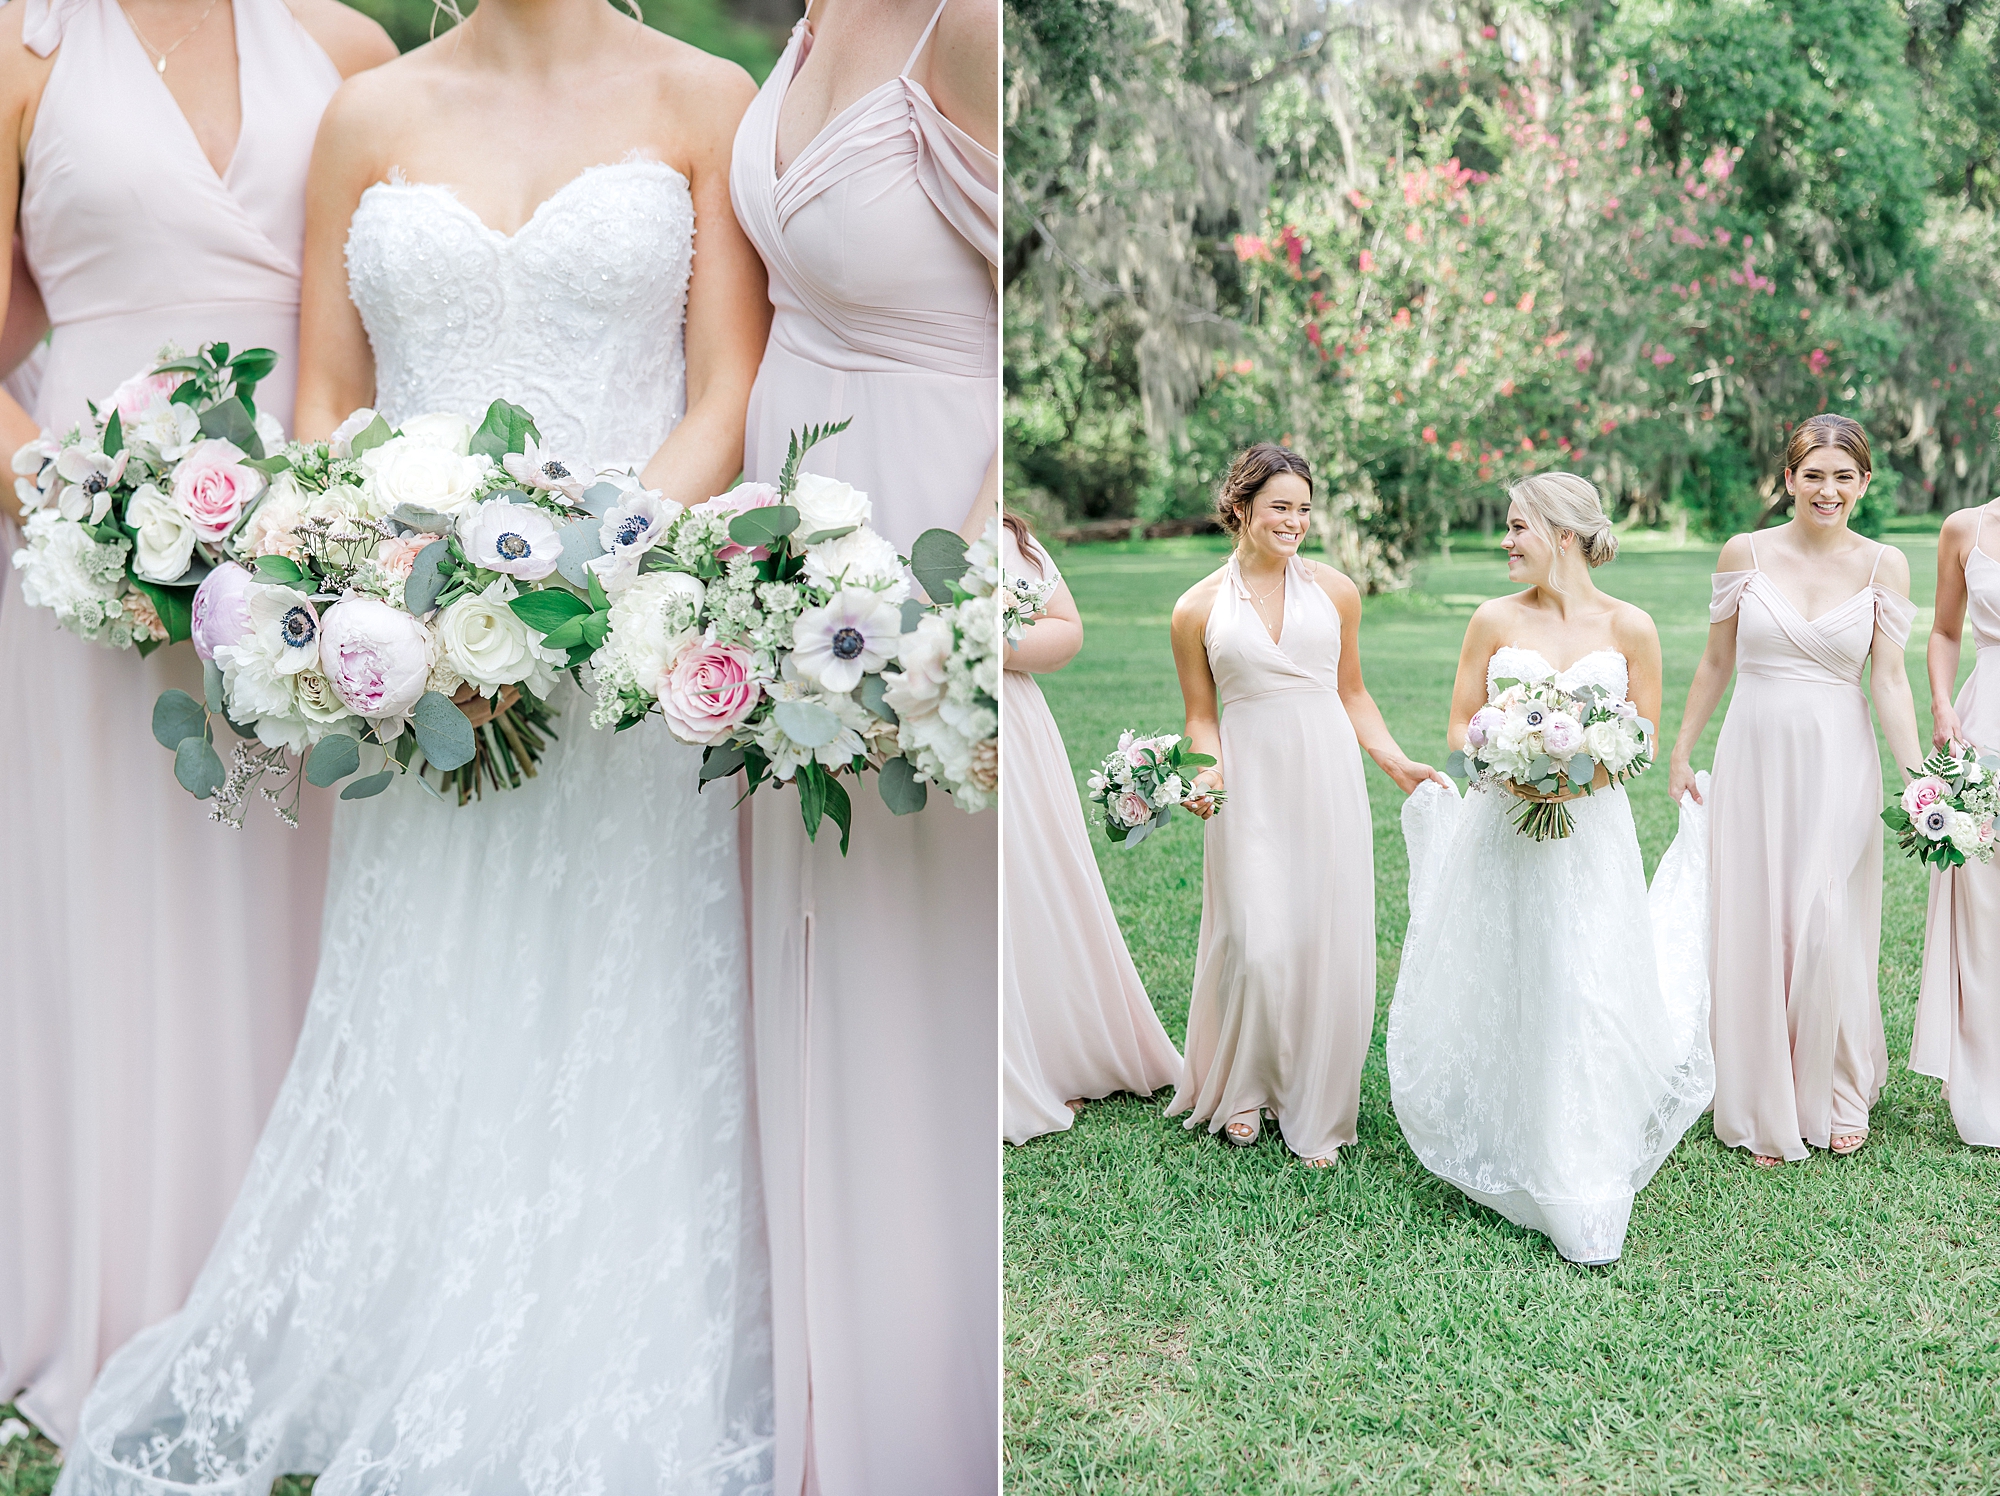 bride and bridesmaids hold white and blush pink wedding flower bouquets